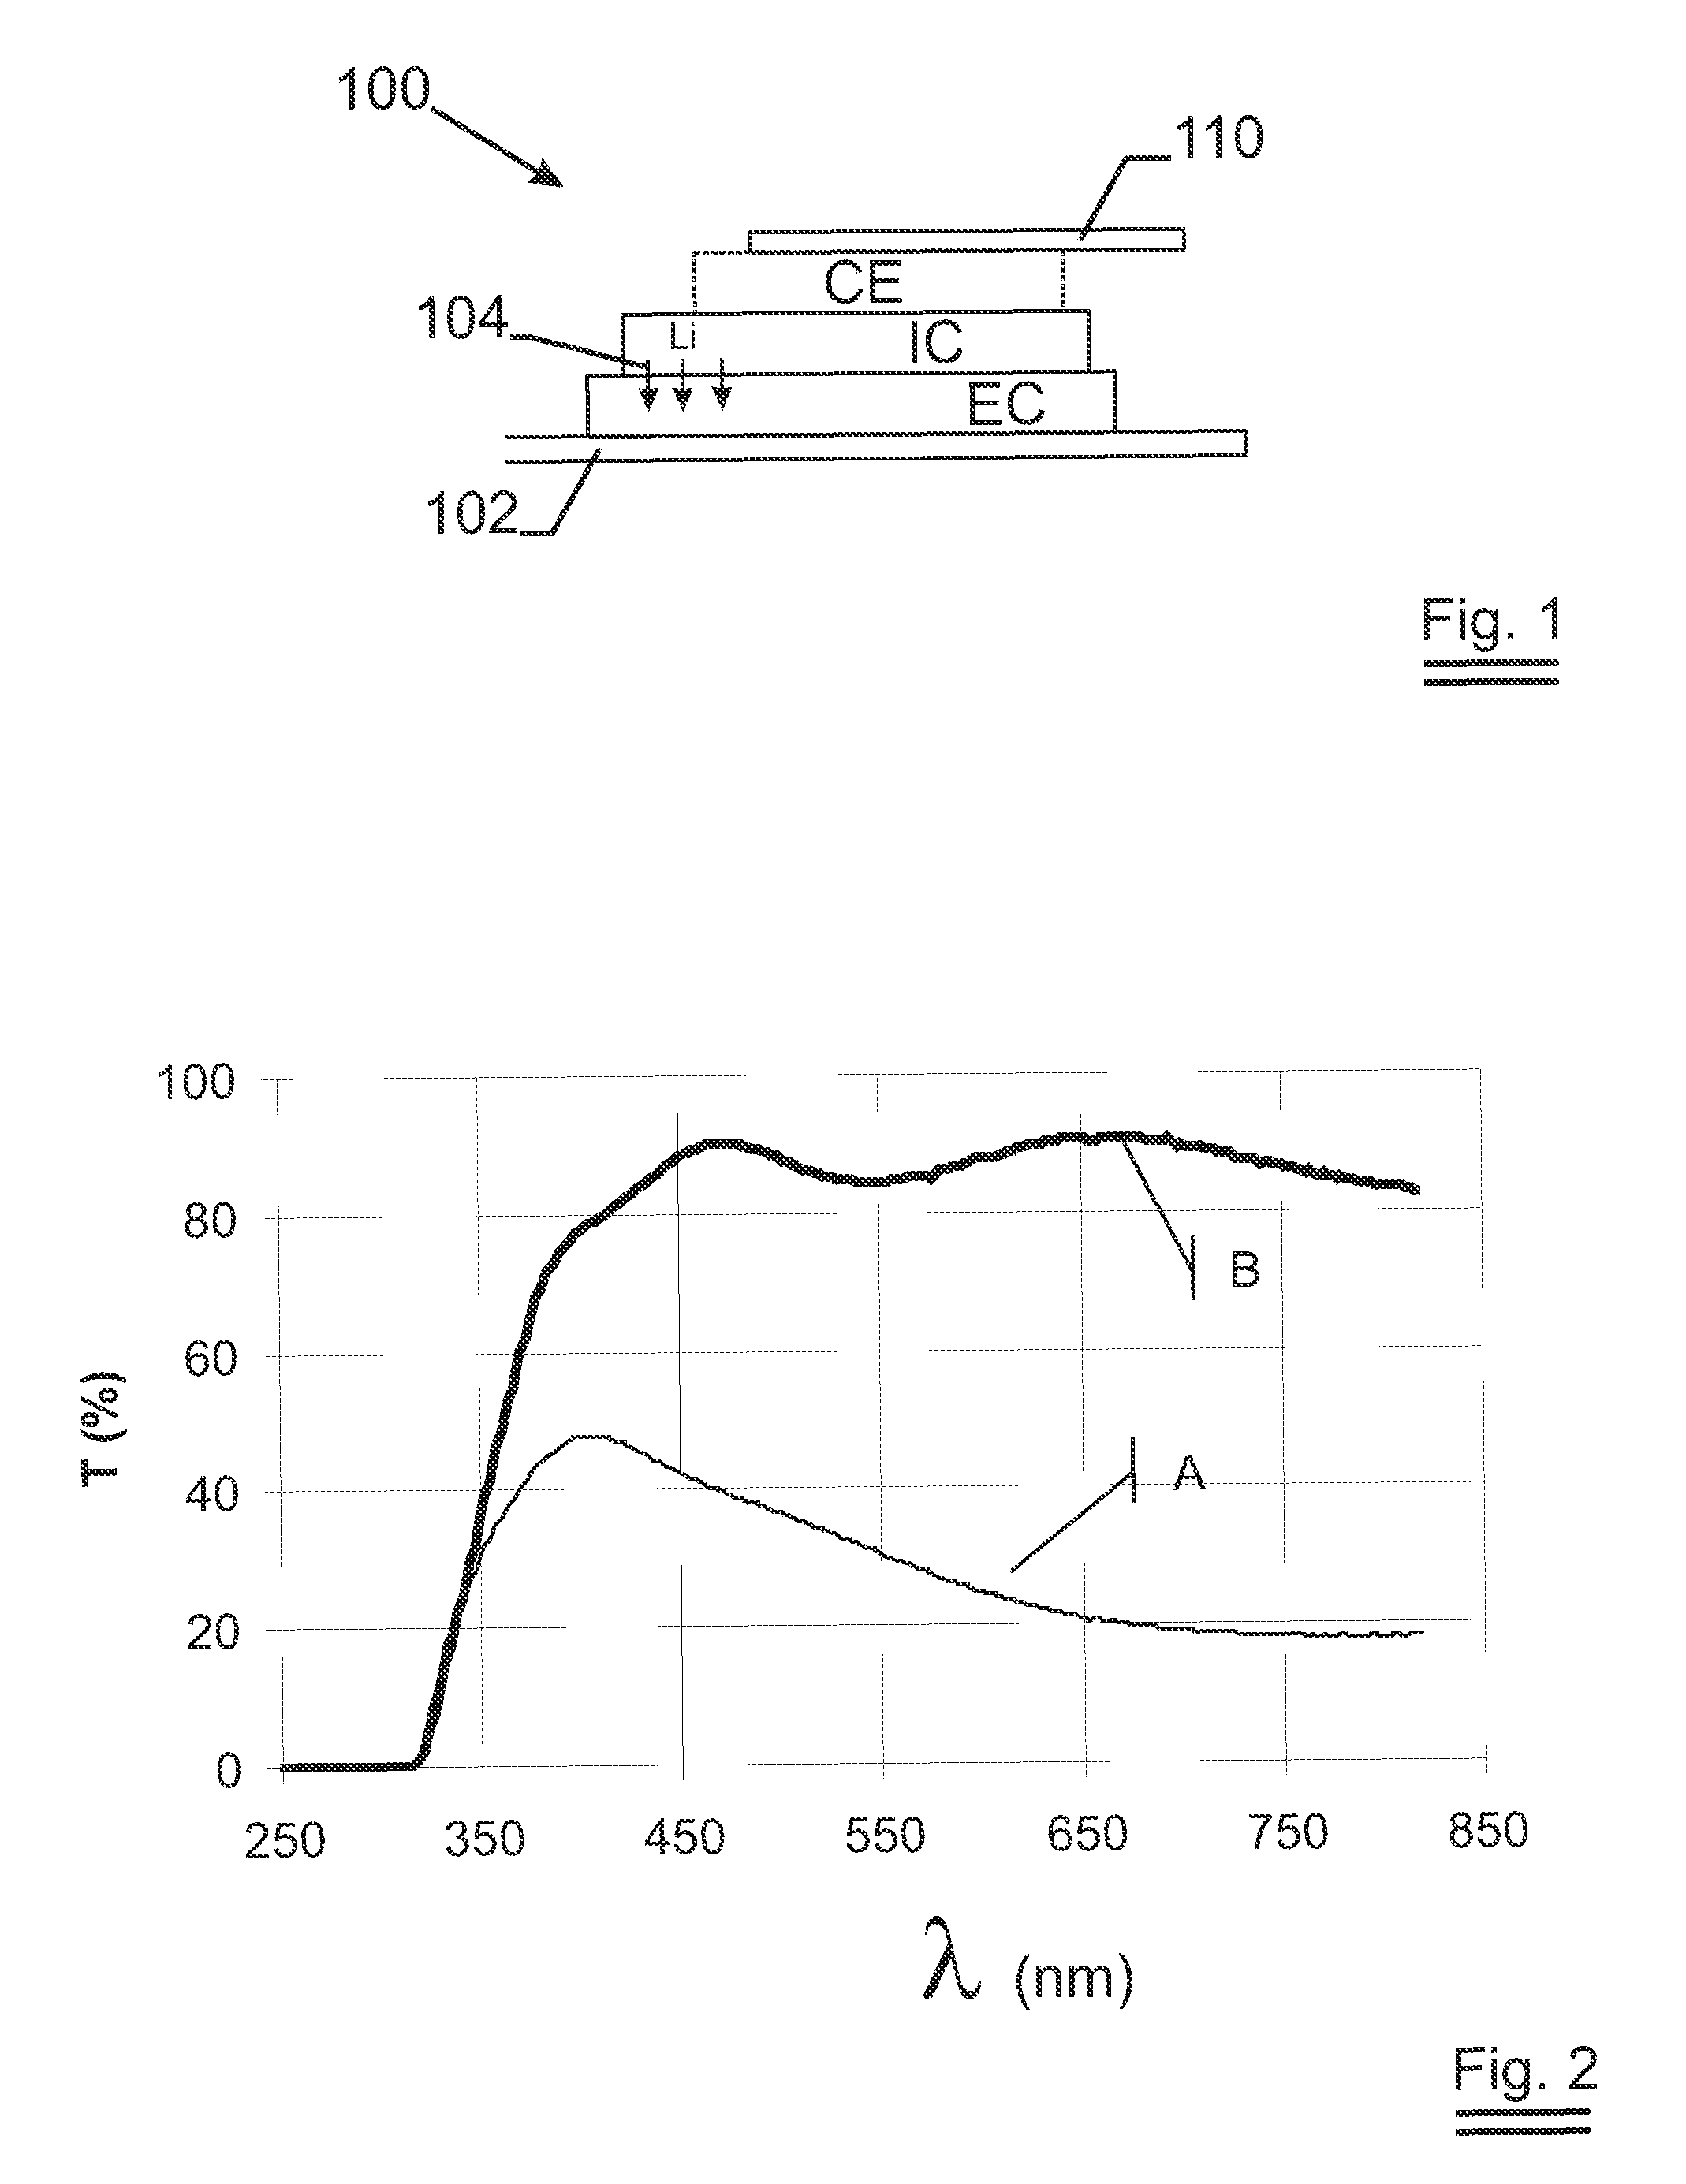 Method of making an ion-switching device without a separate lithiation step